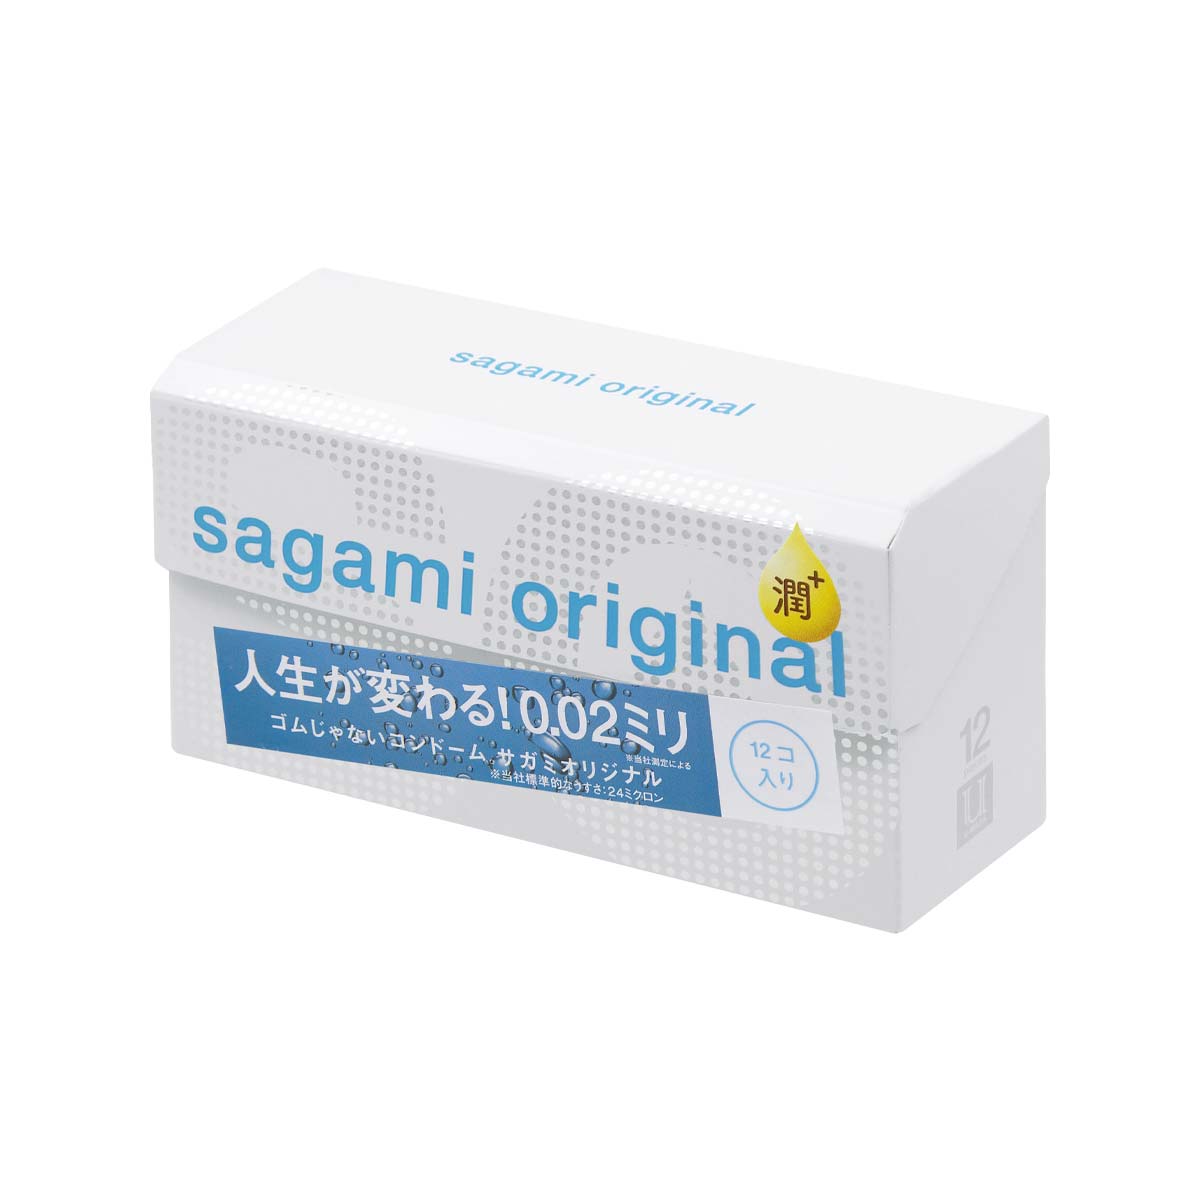 Sagami Original 0.02 Extra Lubricated 12's Pack PU Condom (Defective Packaging)-thumb